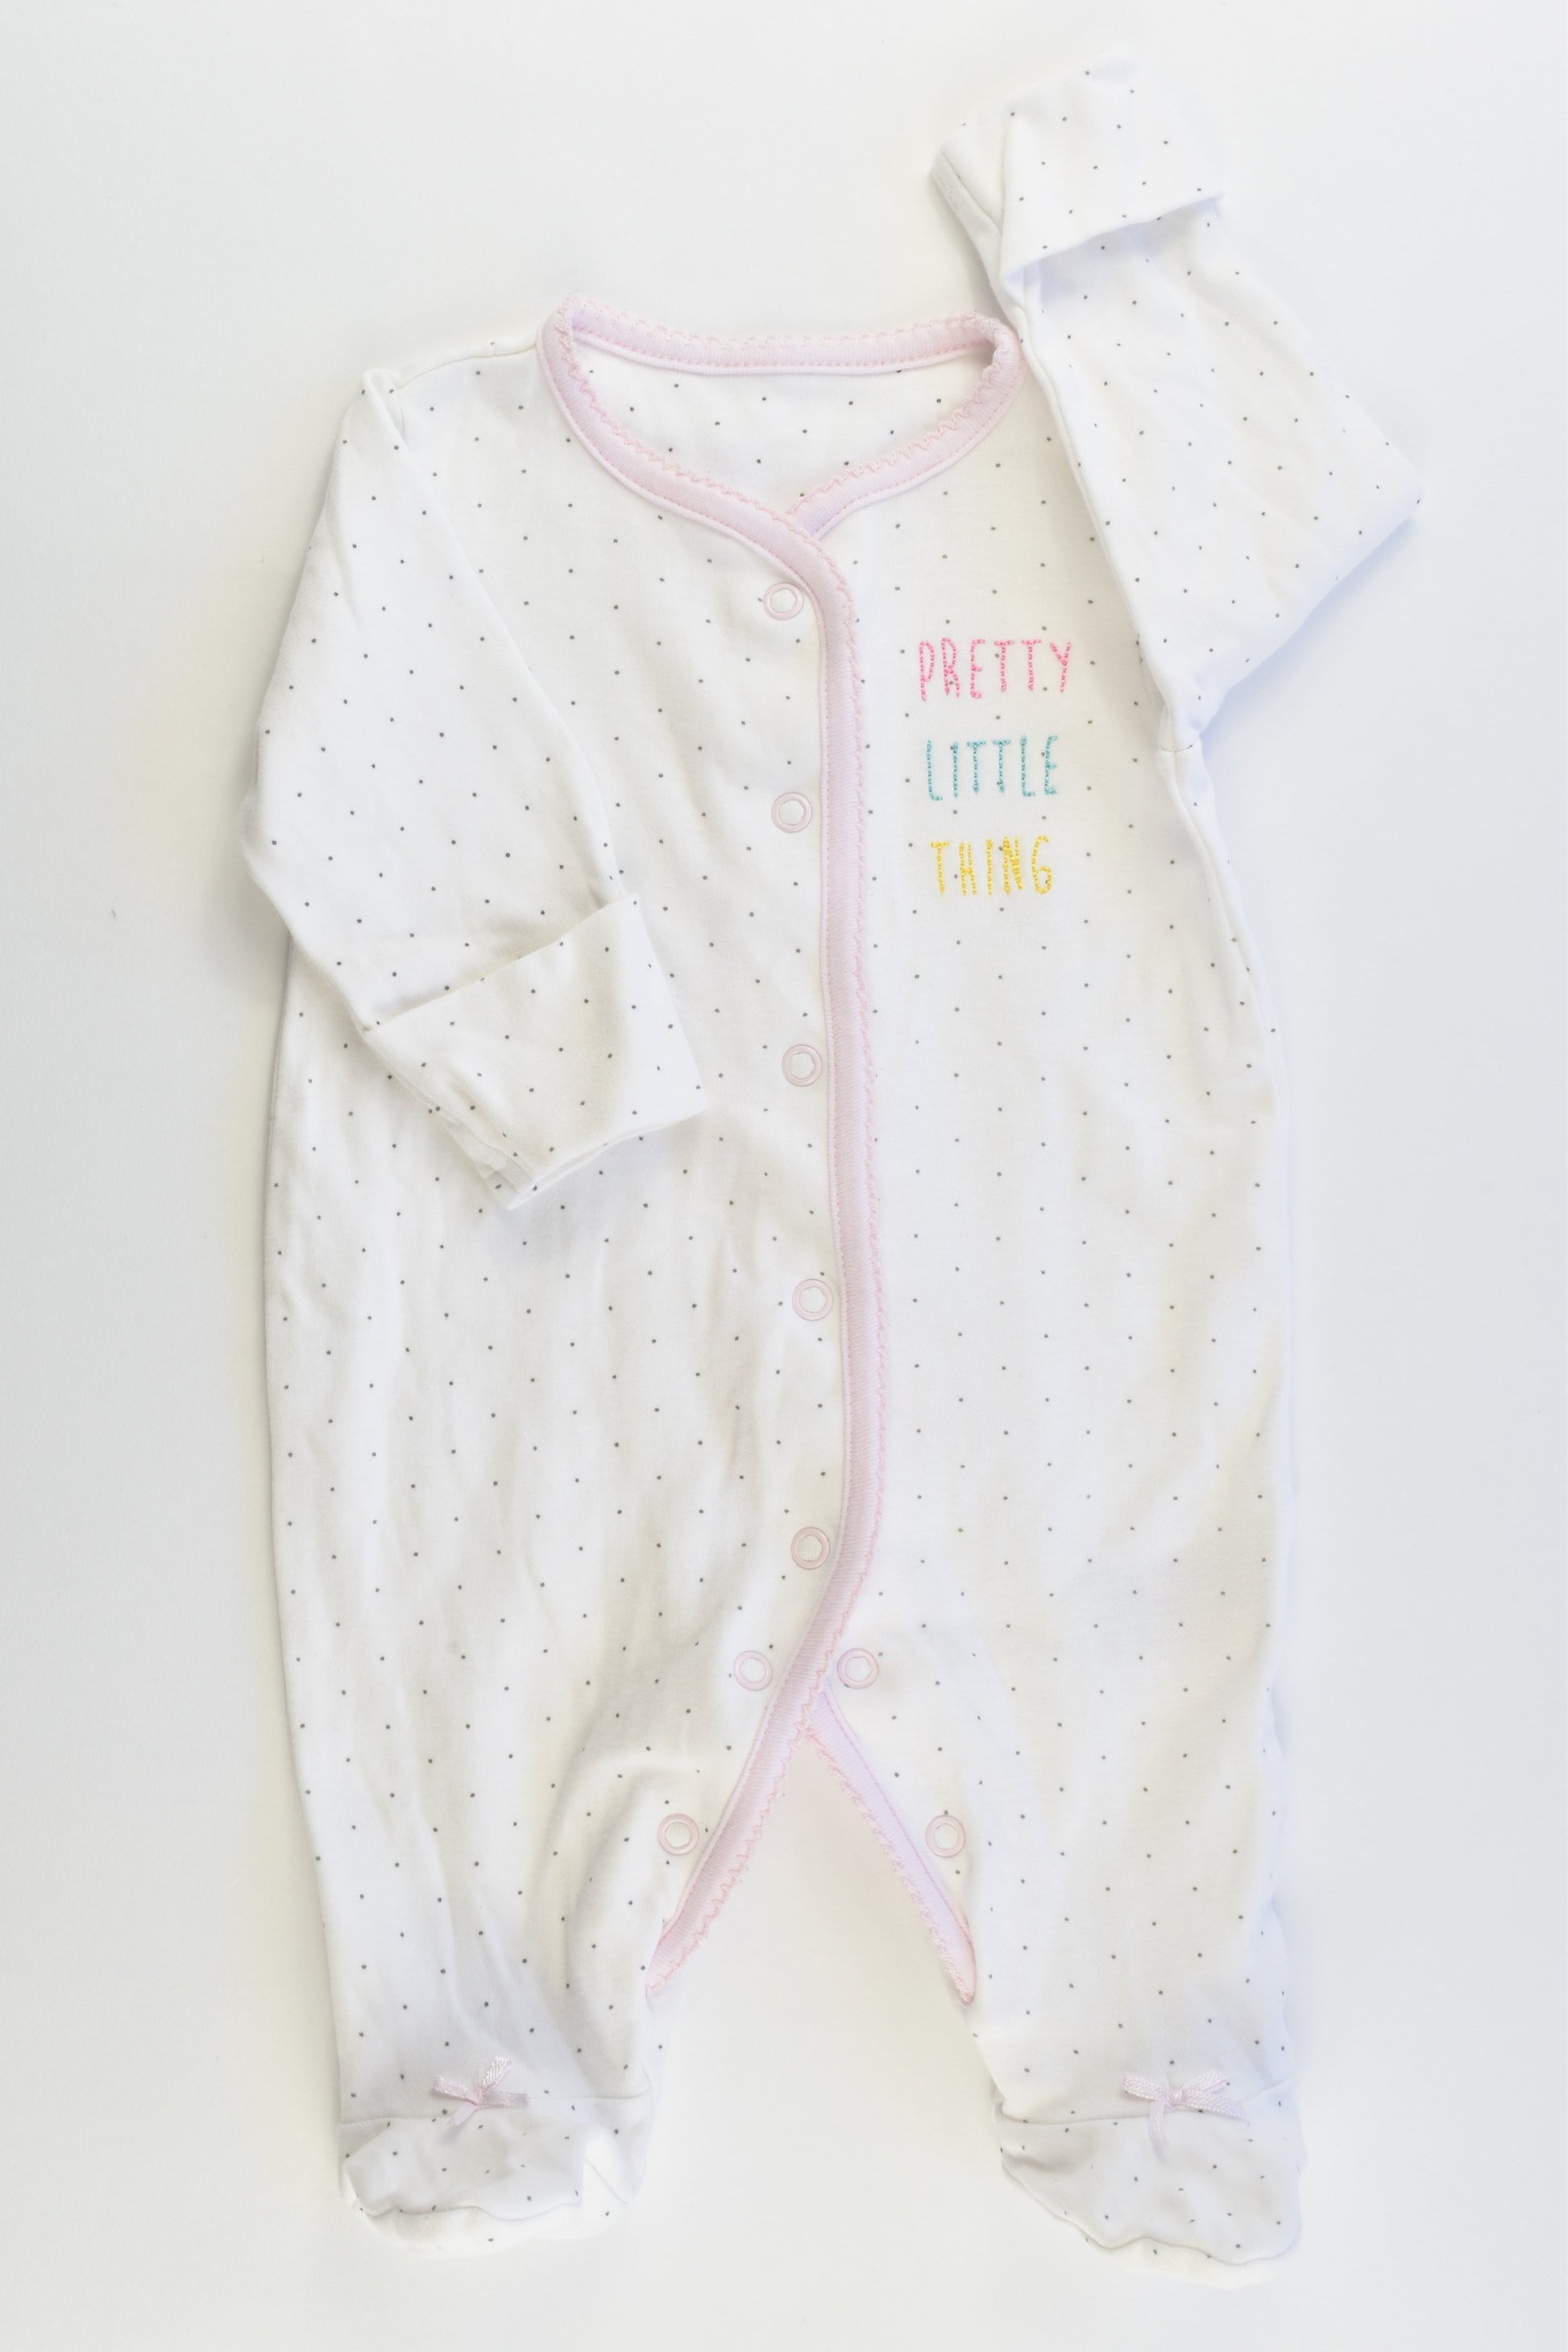 NEW Mothercare Size 000 (0-3 months) Footed 'Pretty Little Thing' Romper